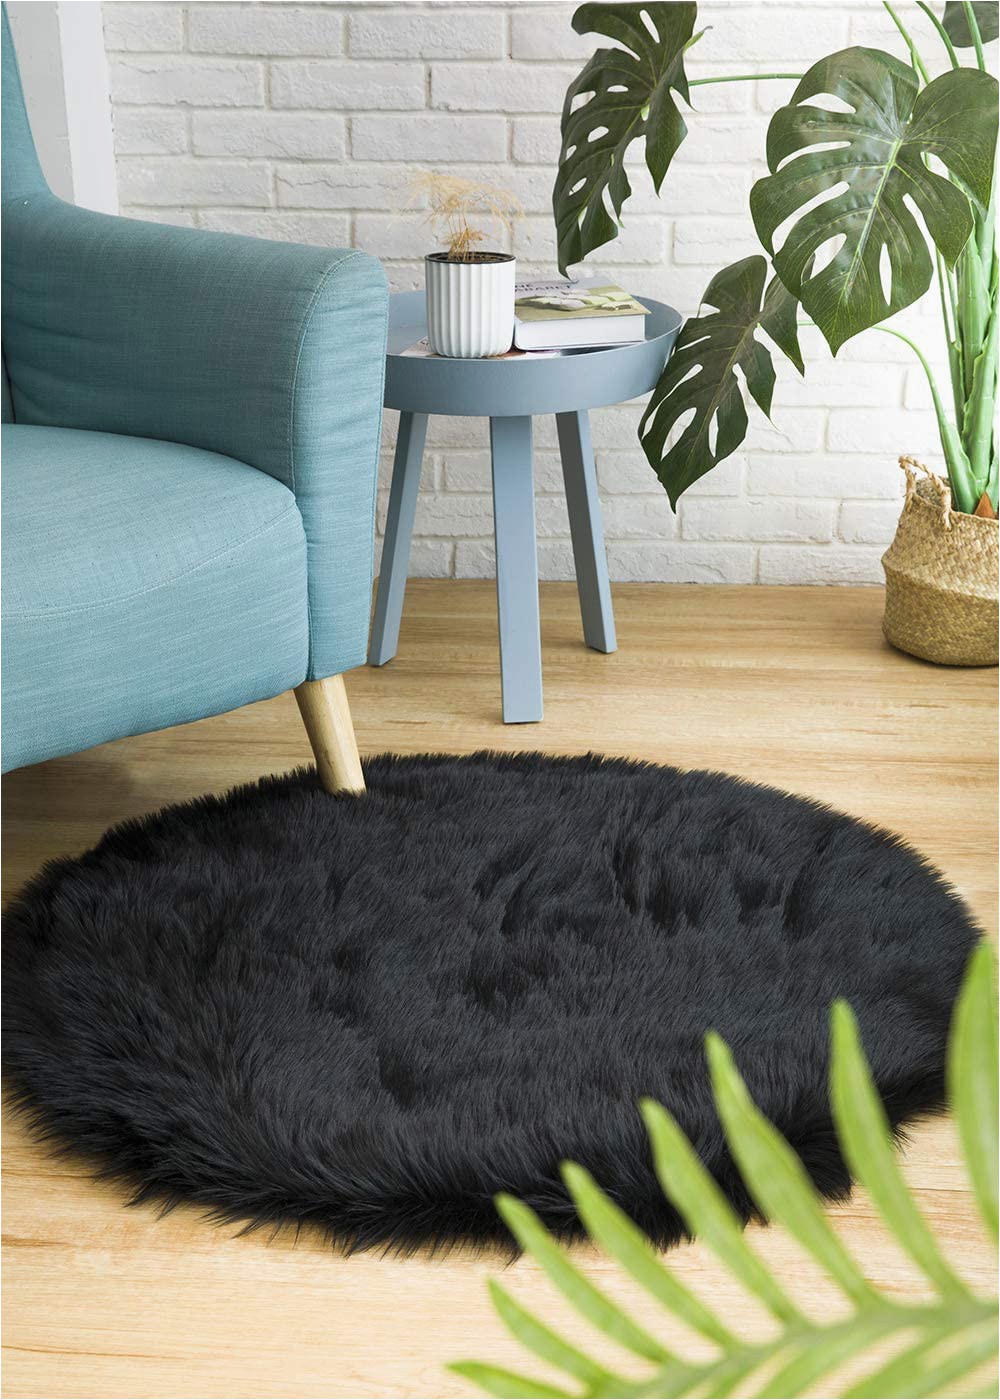 Cheap Faux Fur area Rugs Ciicool soft Faux Sheepskin Fur area Rugs Fluffy Rugs for Bedroom Silky Fuzzy Carpet Furry Rug for Living Room Girls Rooms Black Round 3 X 3 Feet